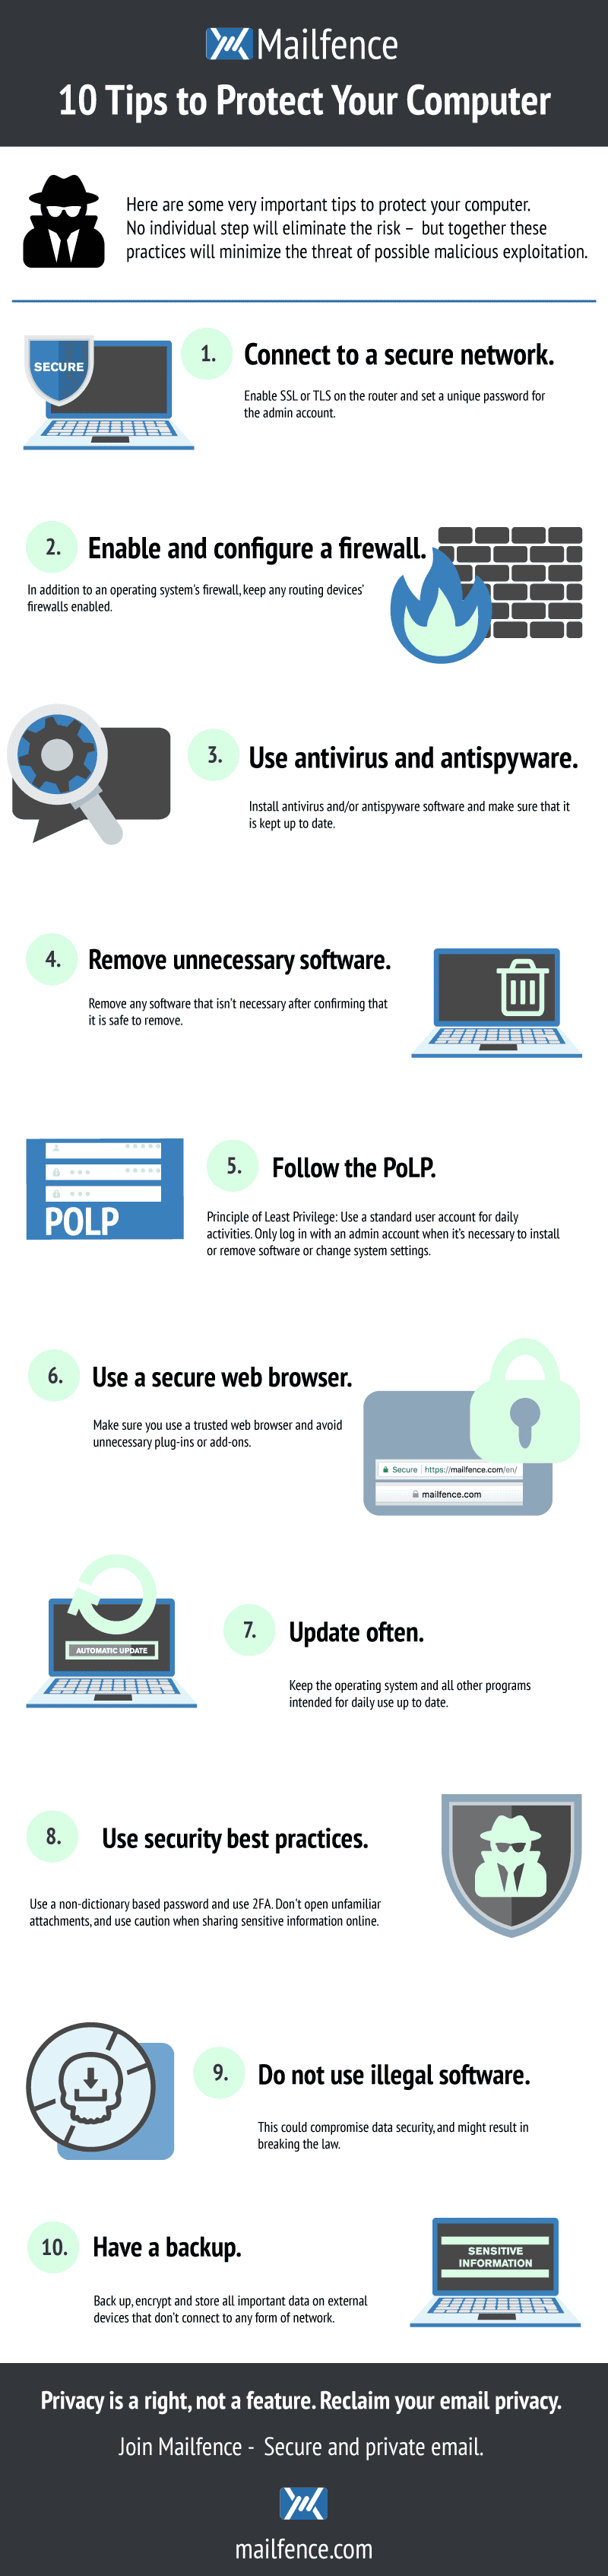 An infographic displaying tips to show the reader different ways to protect their computer.